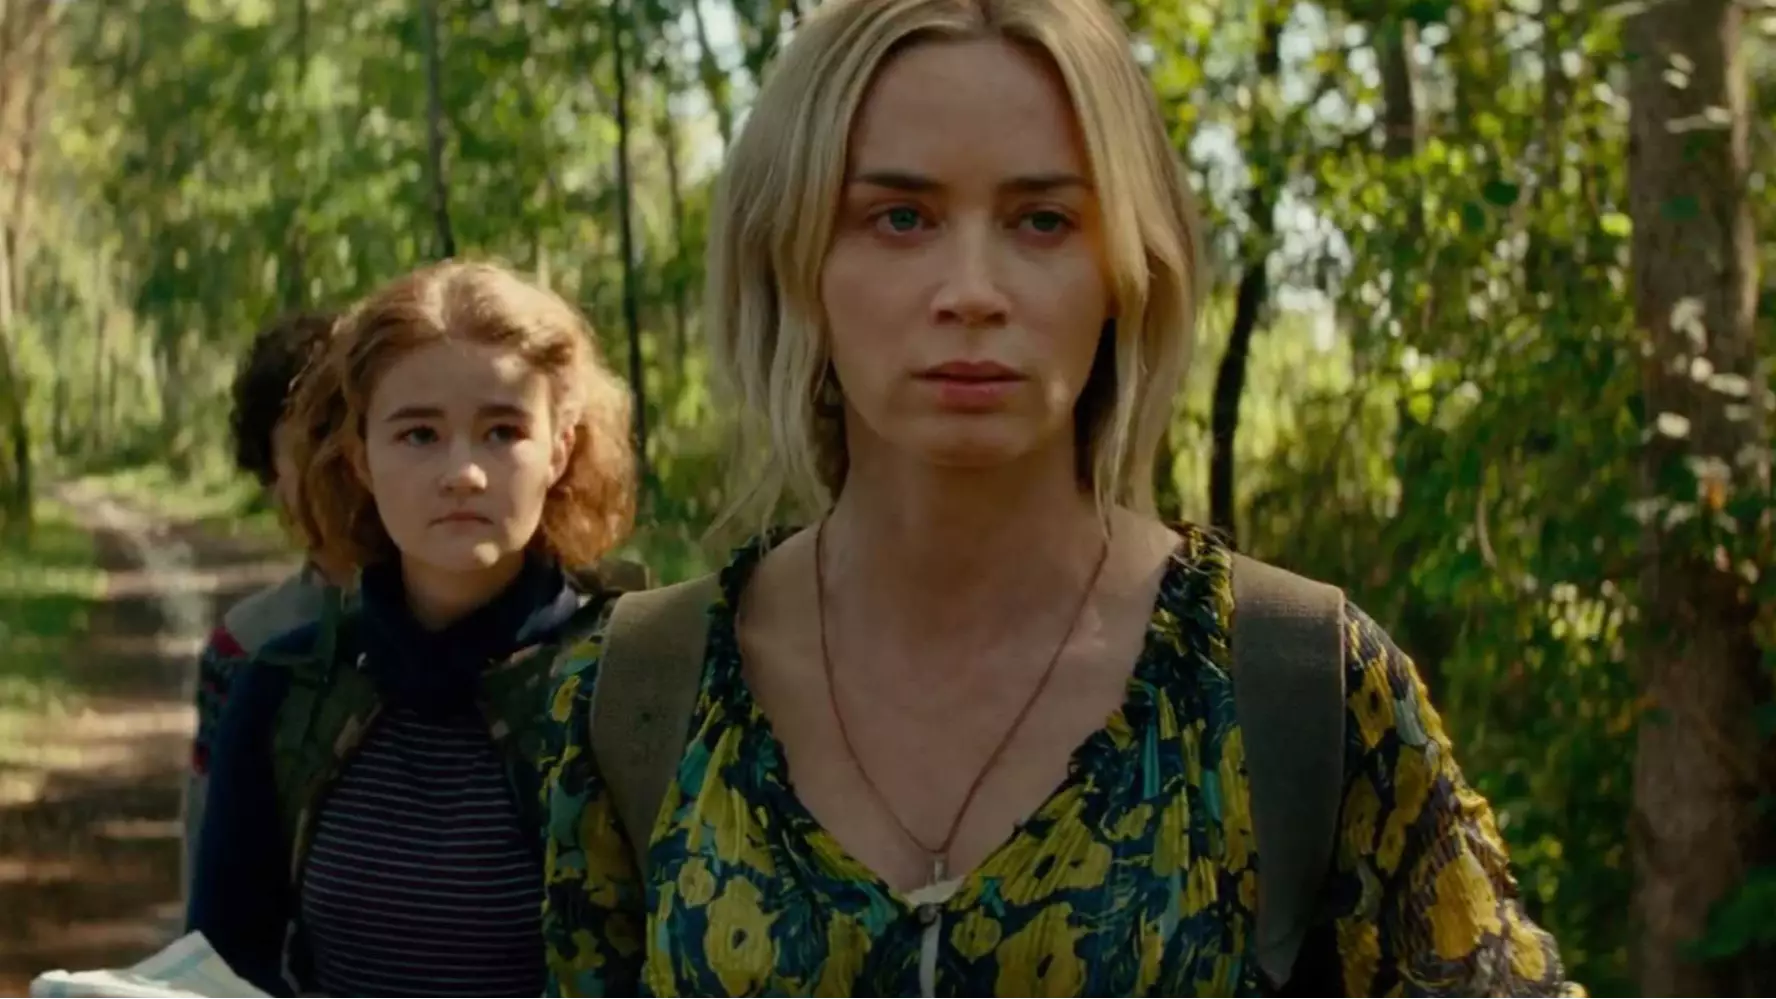 A Quiet Place Part 2 Release Date Has Been Delayed In Wake Of Coronavirus Outbreak